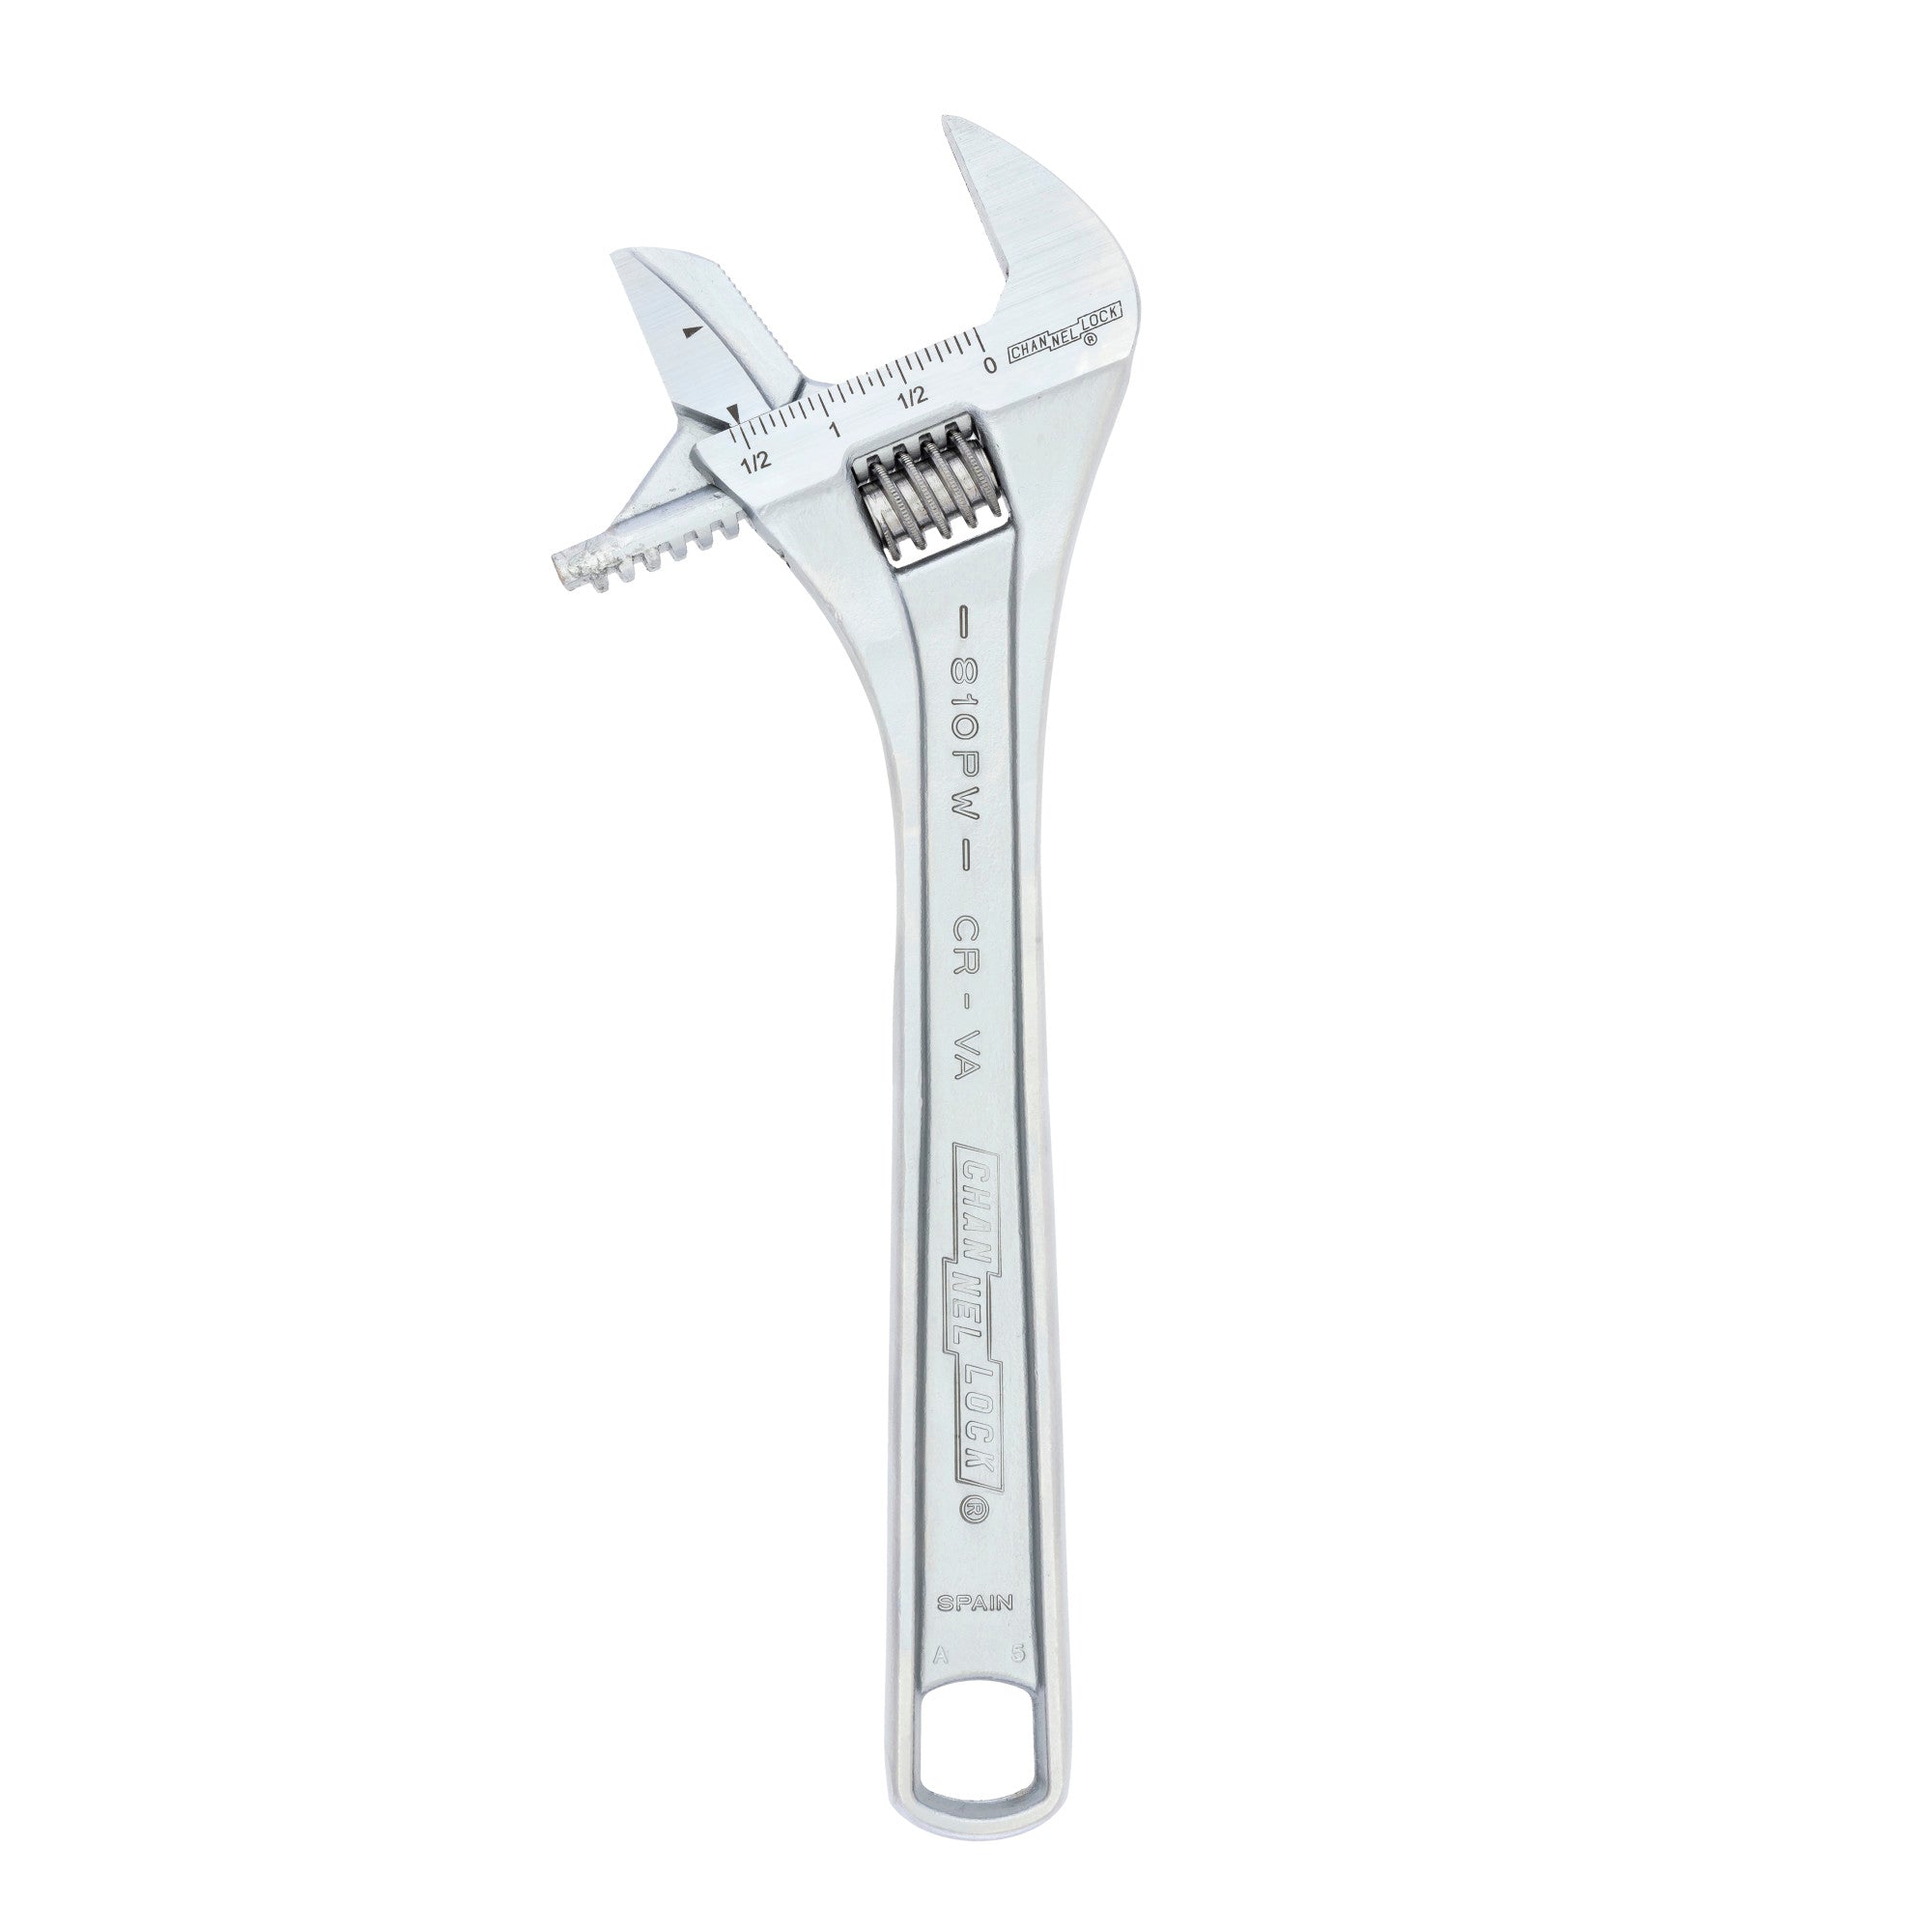 10-inch Reversible Jaw Adjustable Wrench | Shop CHANNELLOCK®